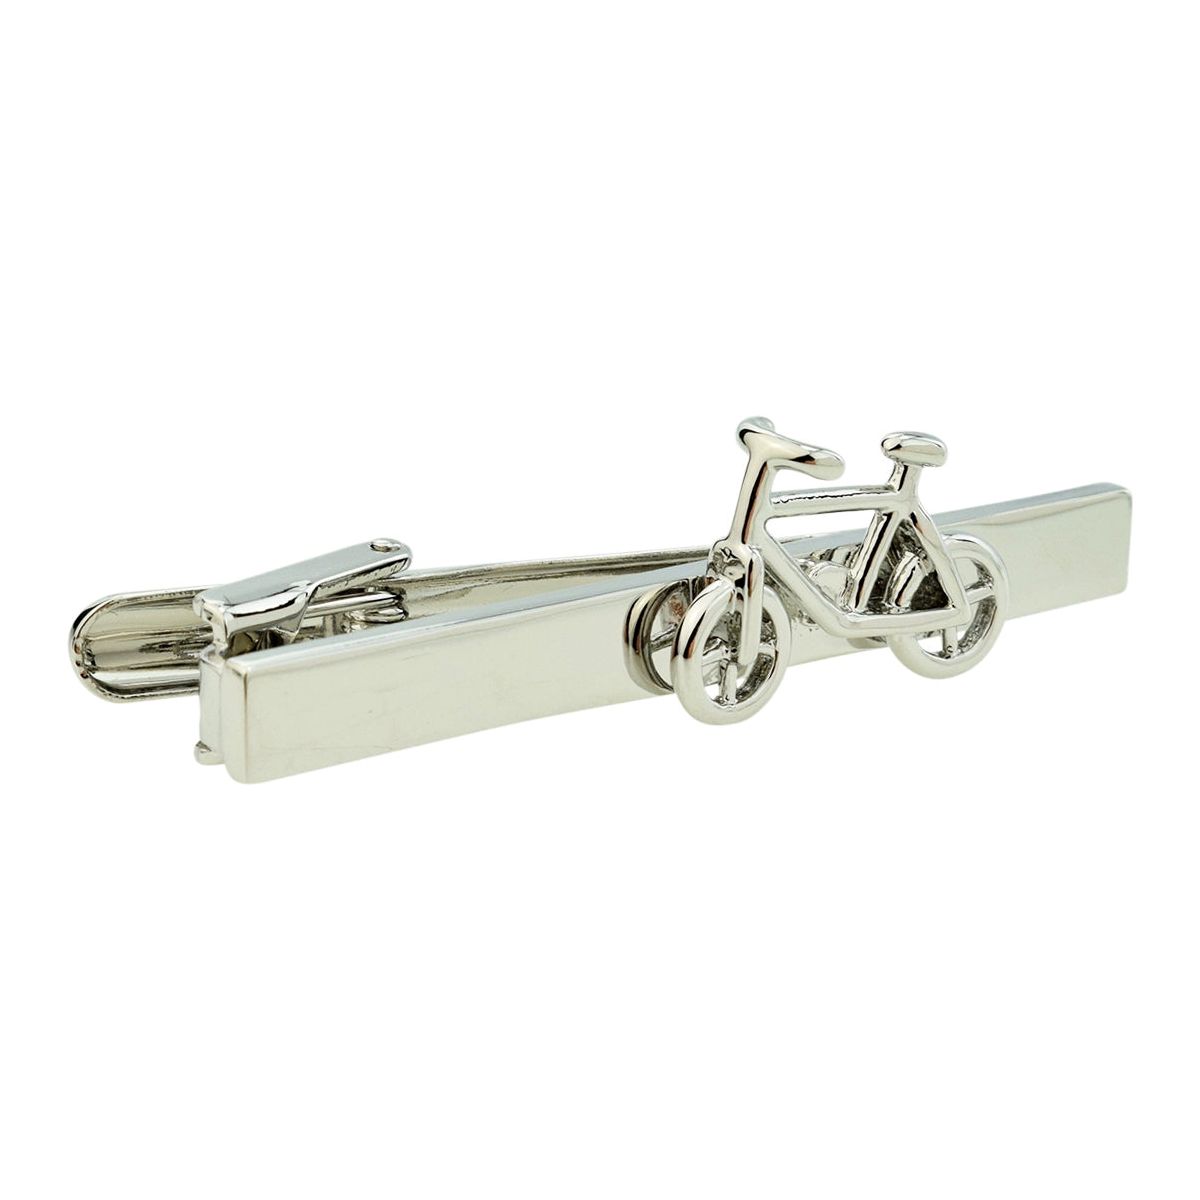 Pushbike Tie Clip - Ashton and Finch